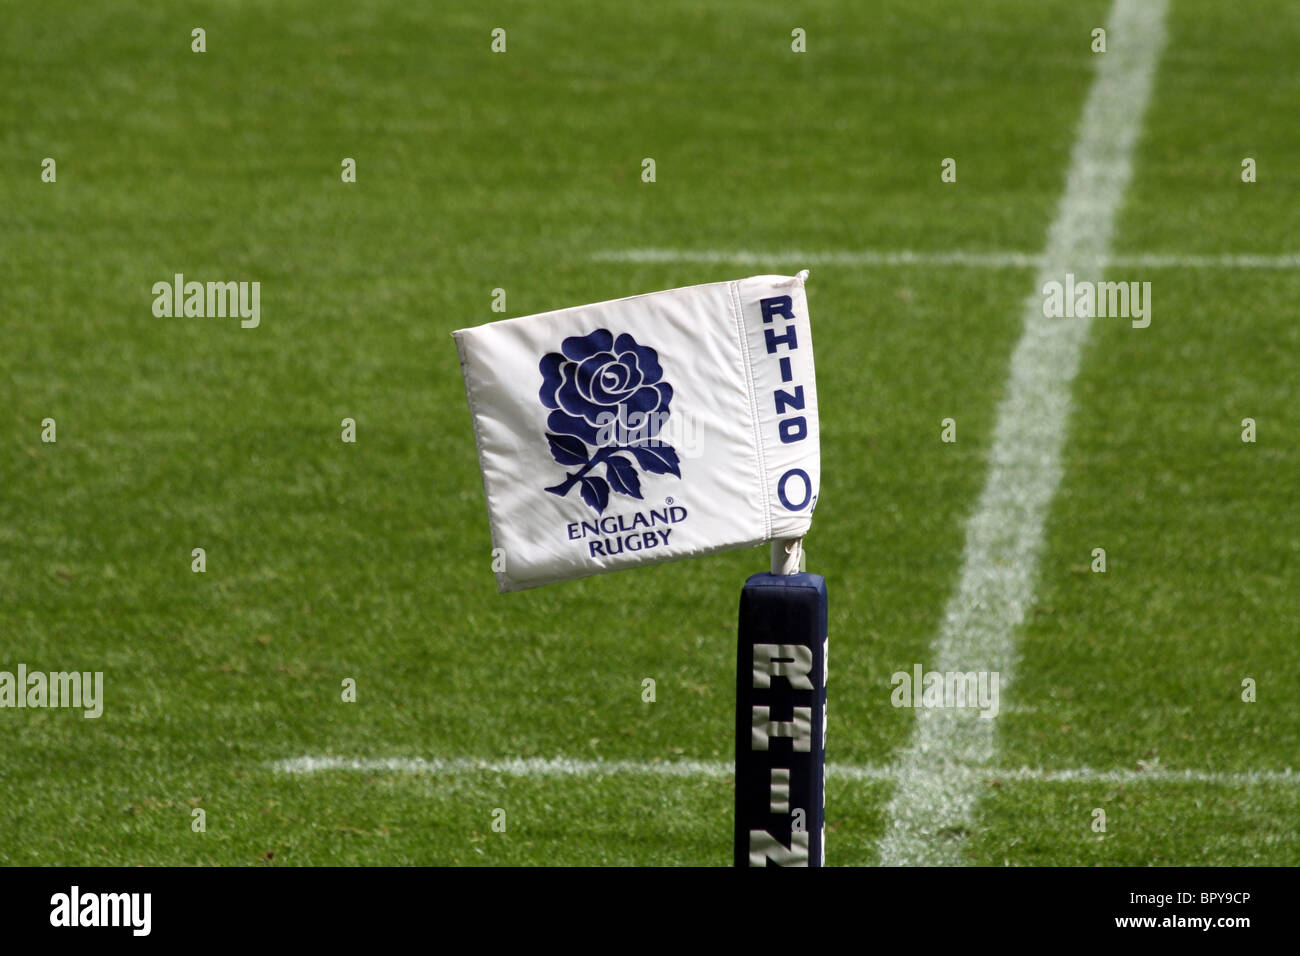 Rugby pitch and England Rugby flag at Twickenham Stadium Stock Photo